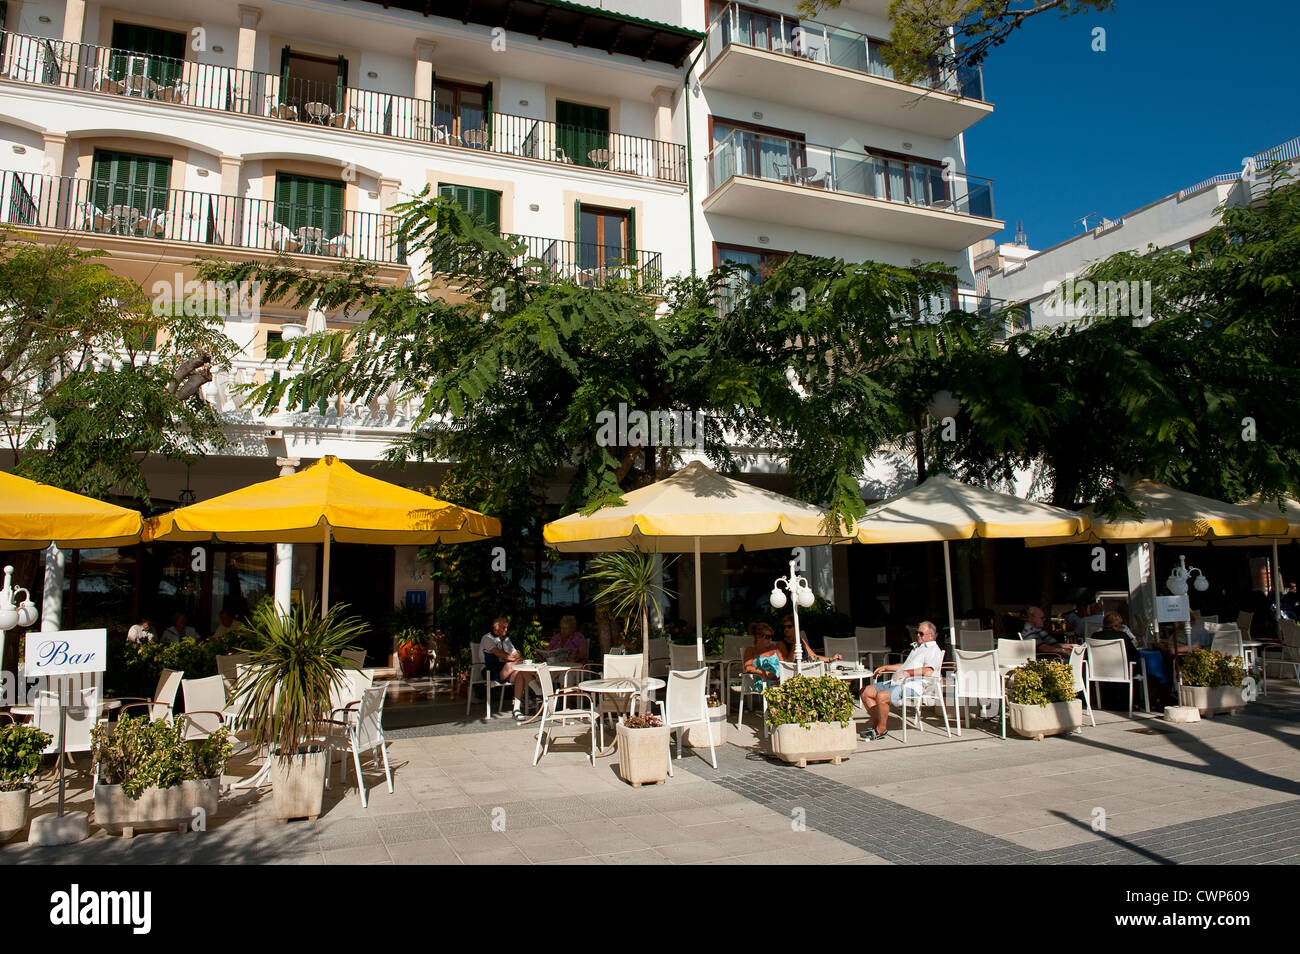 People sitting and eating al fresco outside a restaurant in Puerto Pollensa, Mallorca, Spain. Stock Photo